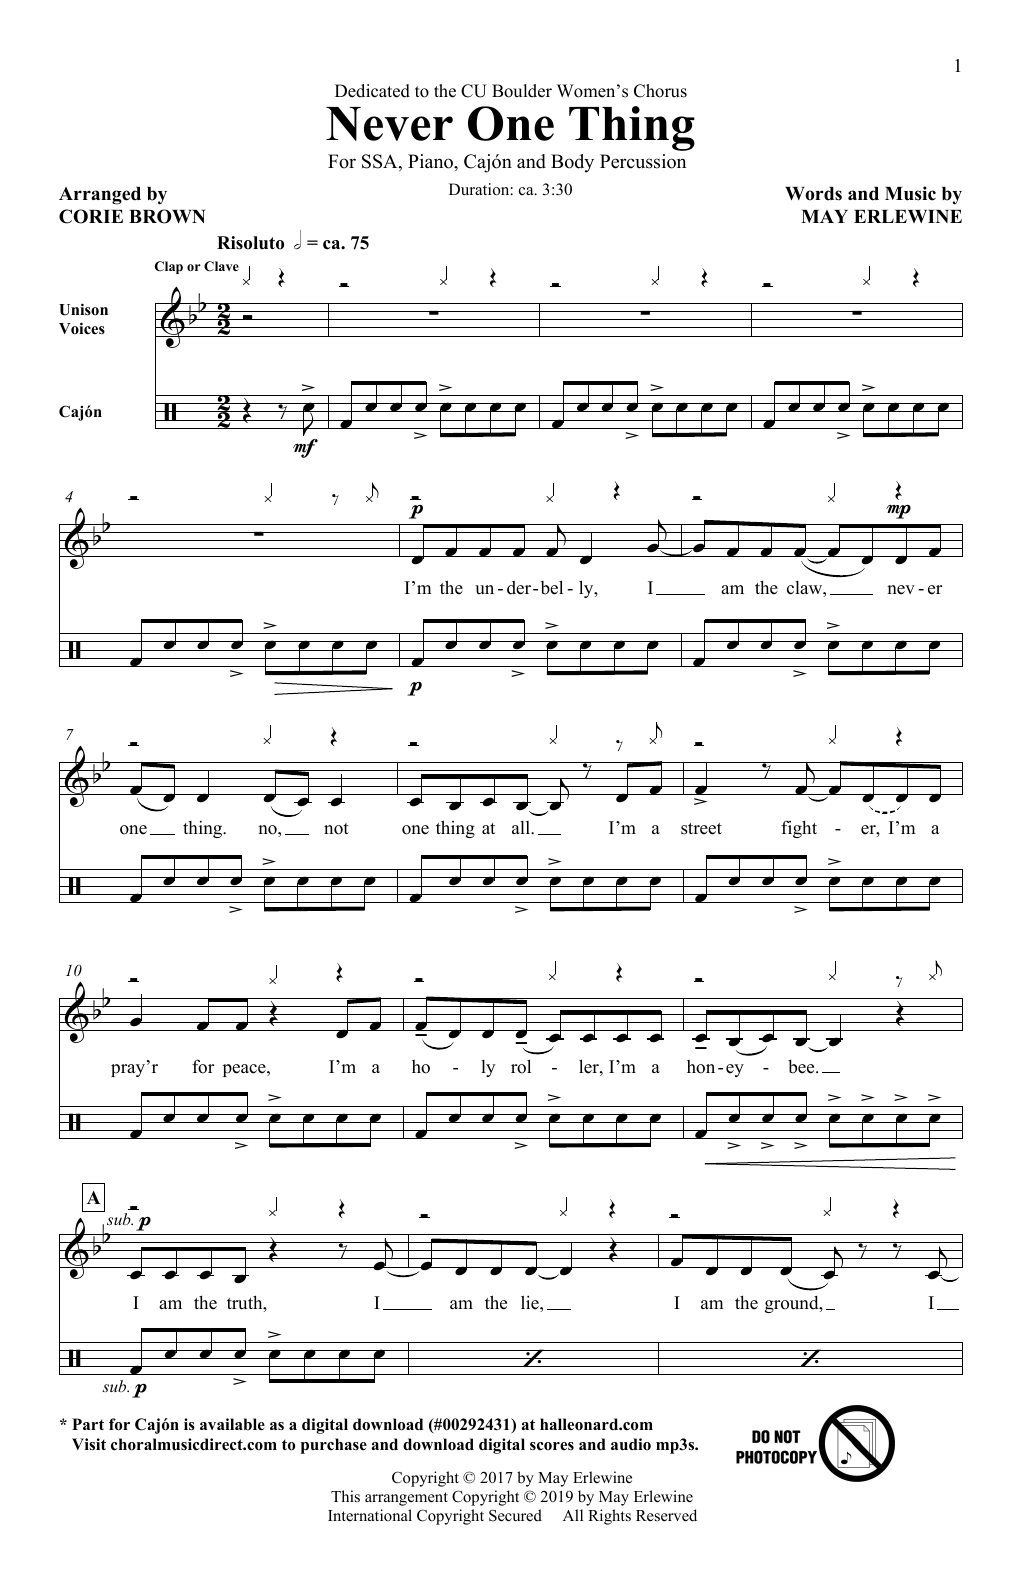 Download May Erlewine Never One Thing (arr. Corie Brown) Sheet Music